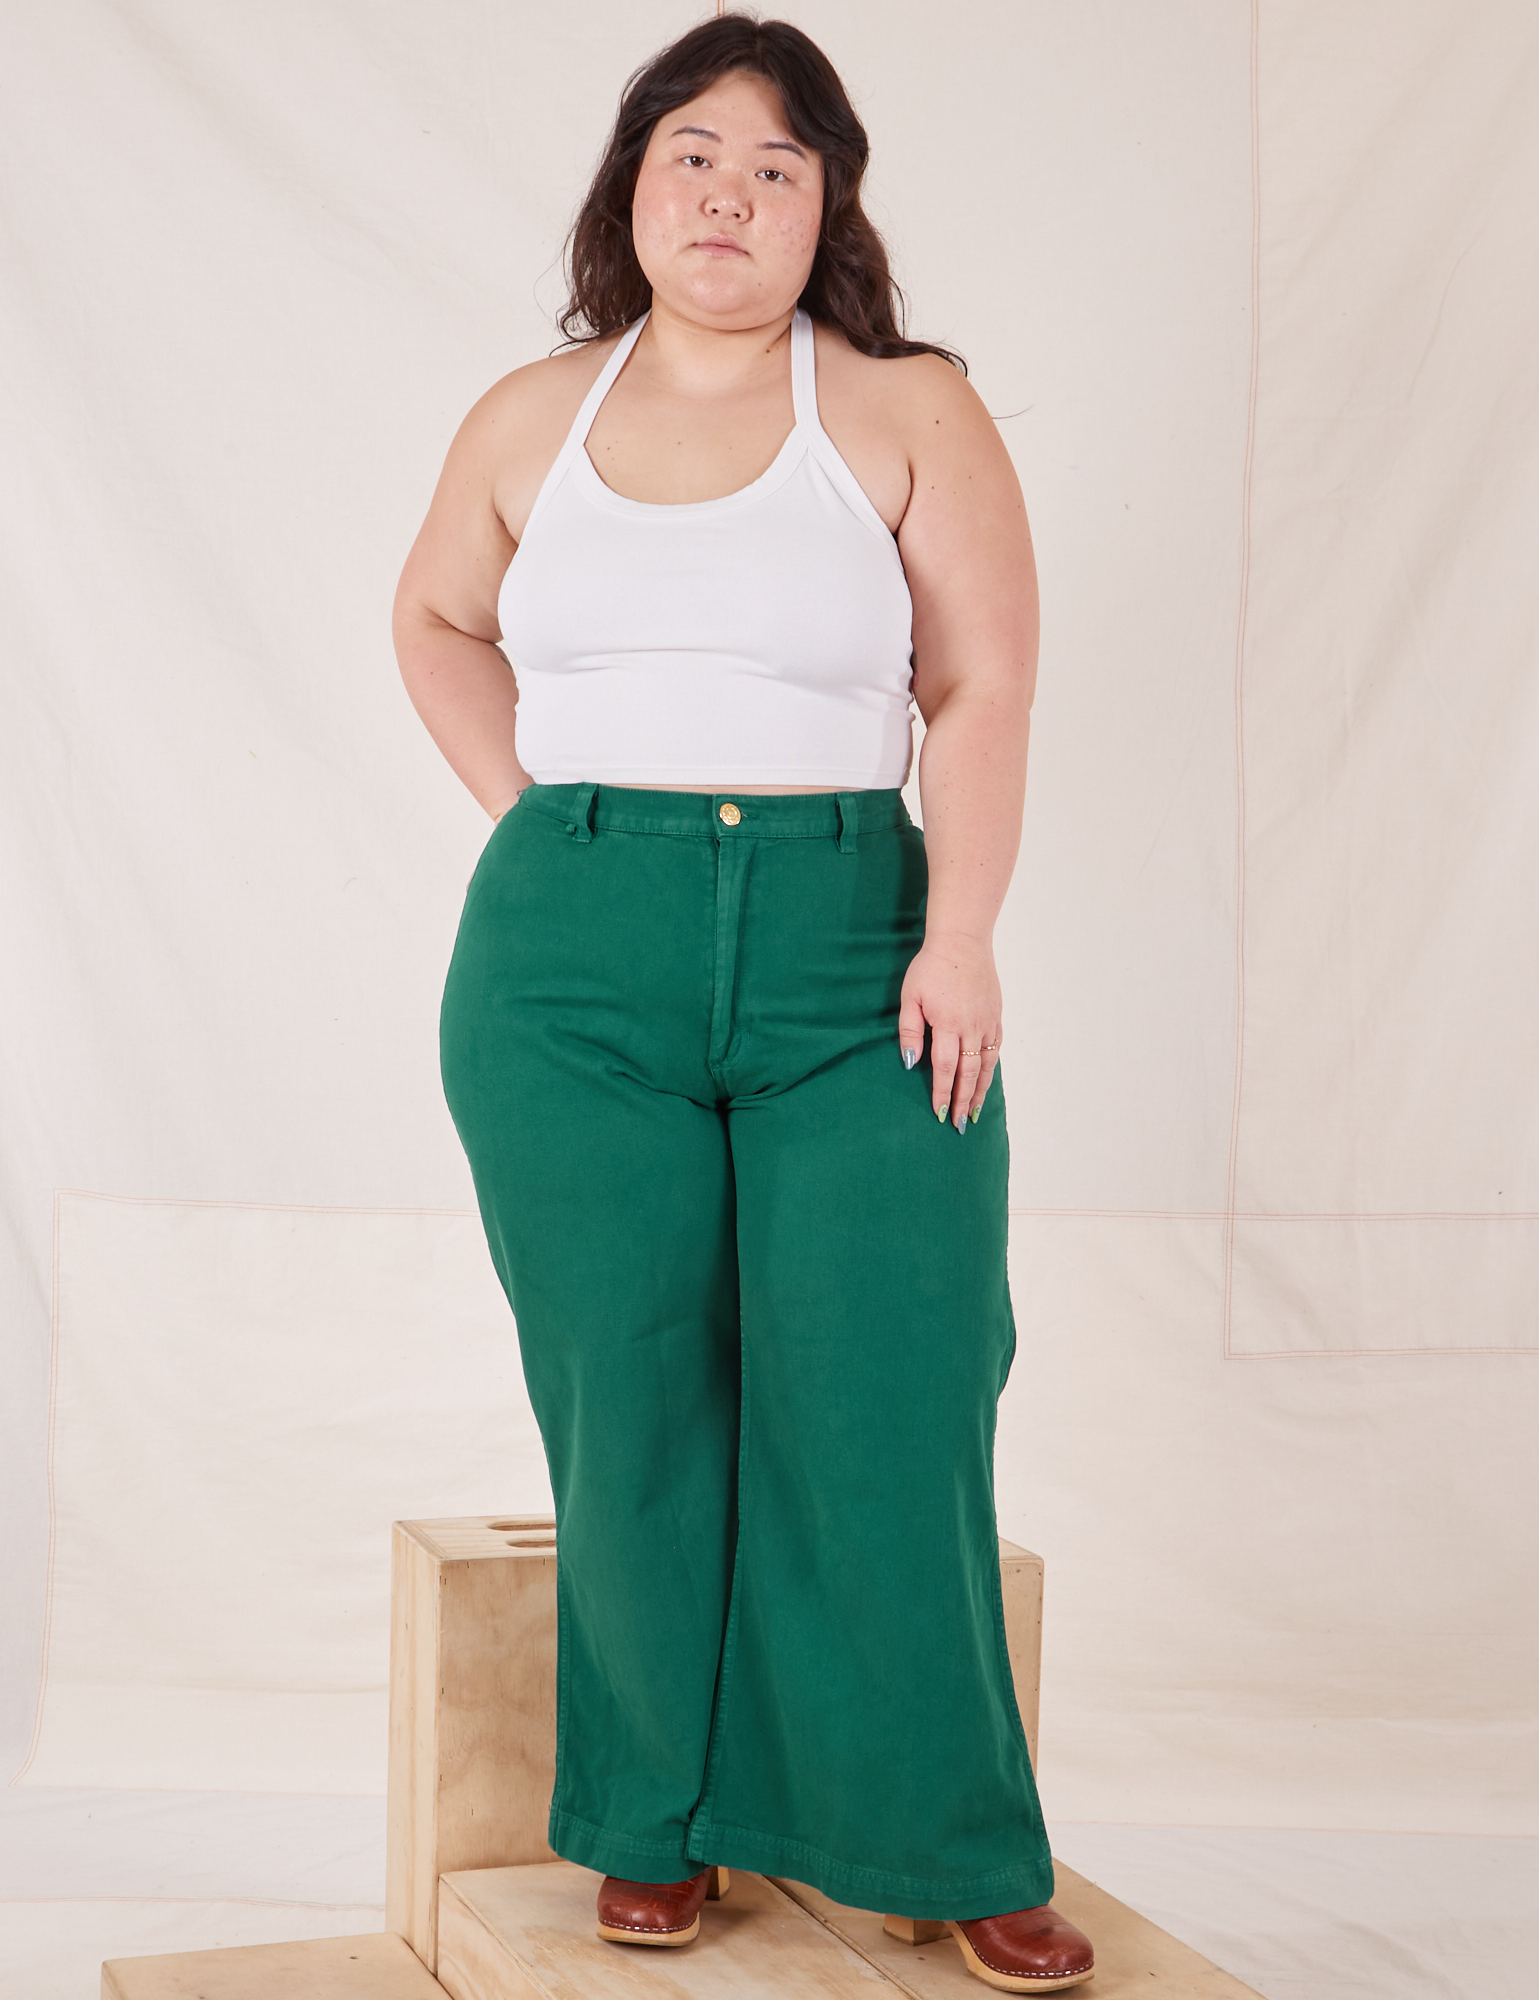 Ashley is 5&#39;7&quot; and wearing 1XL Bell Bottoms in Hunter Green paired with vintage off-white Halter Top